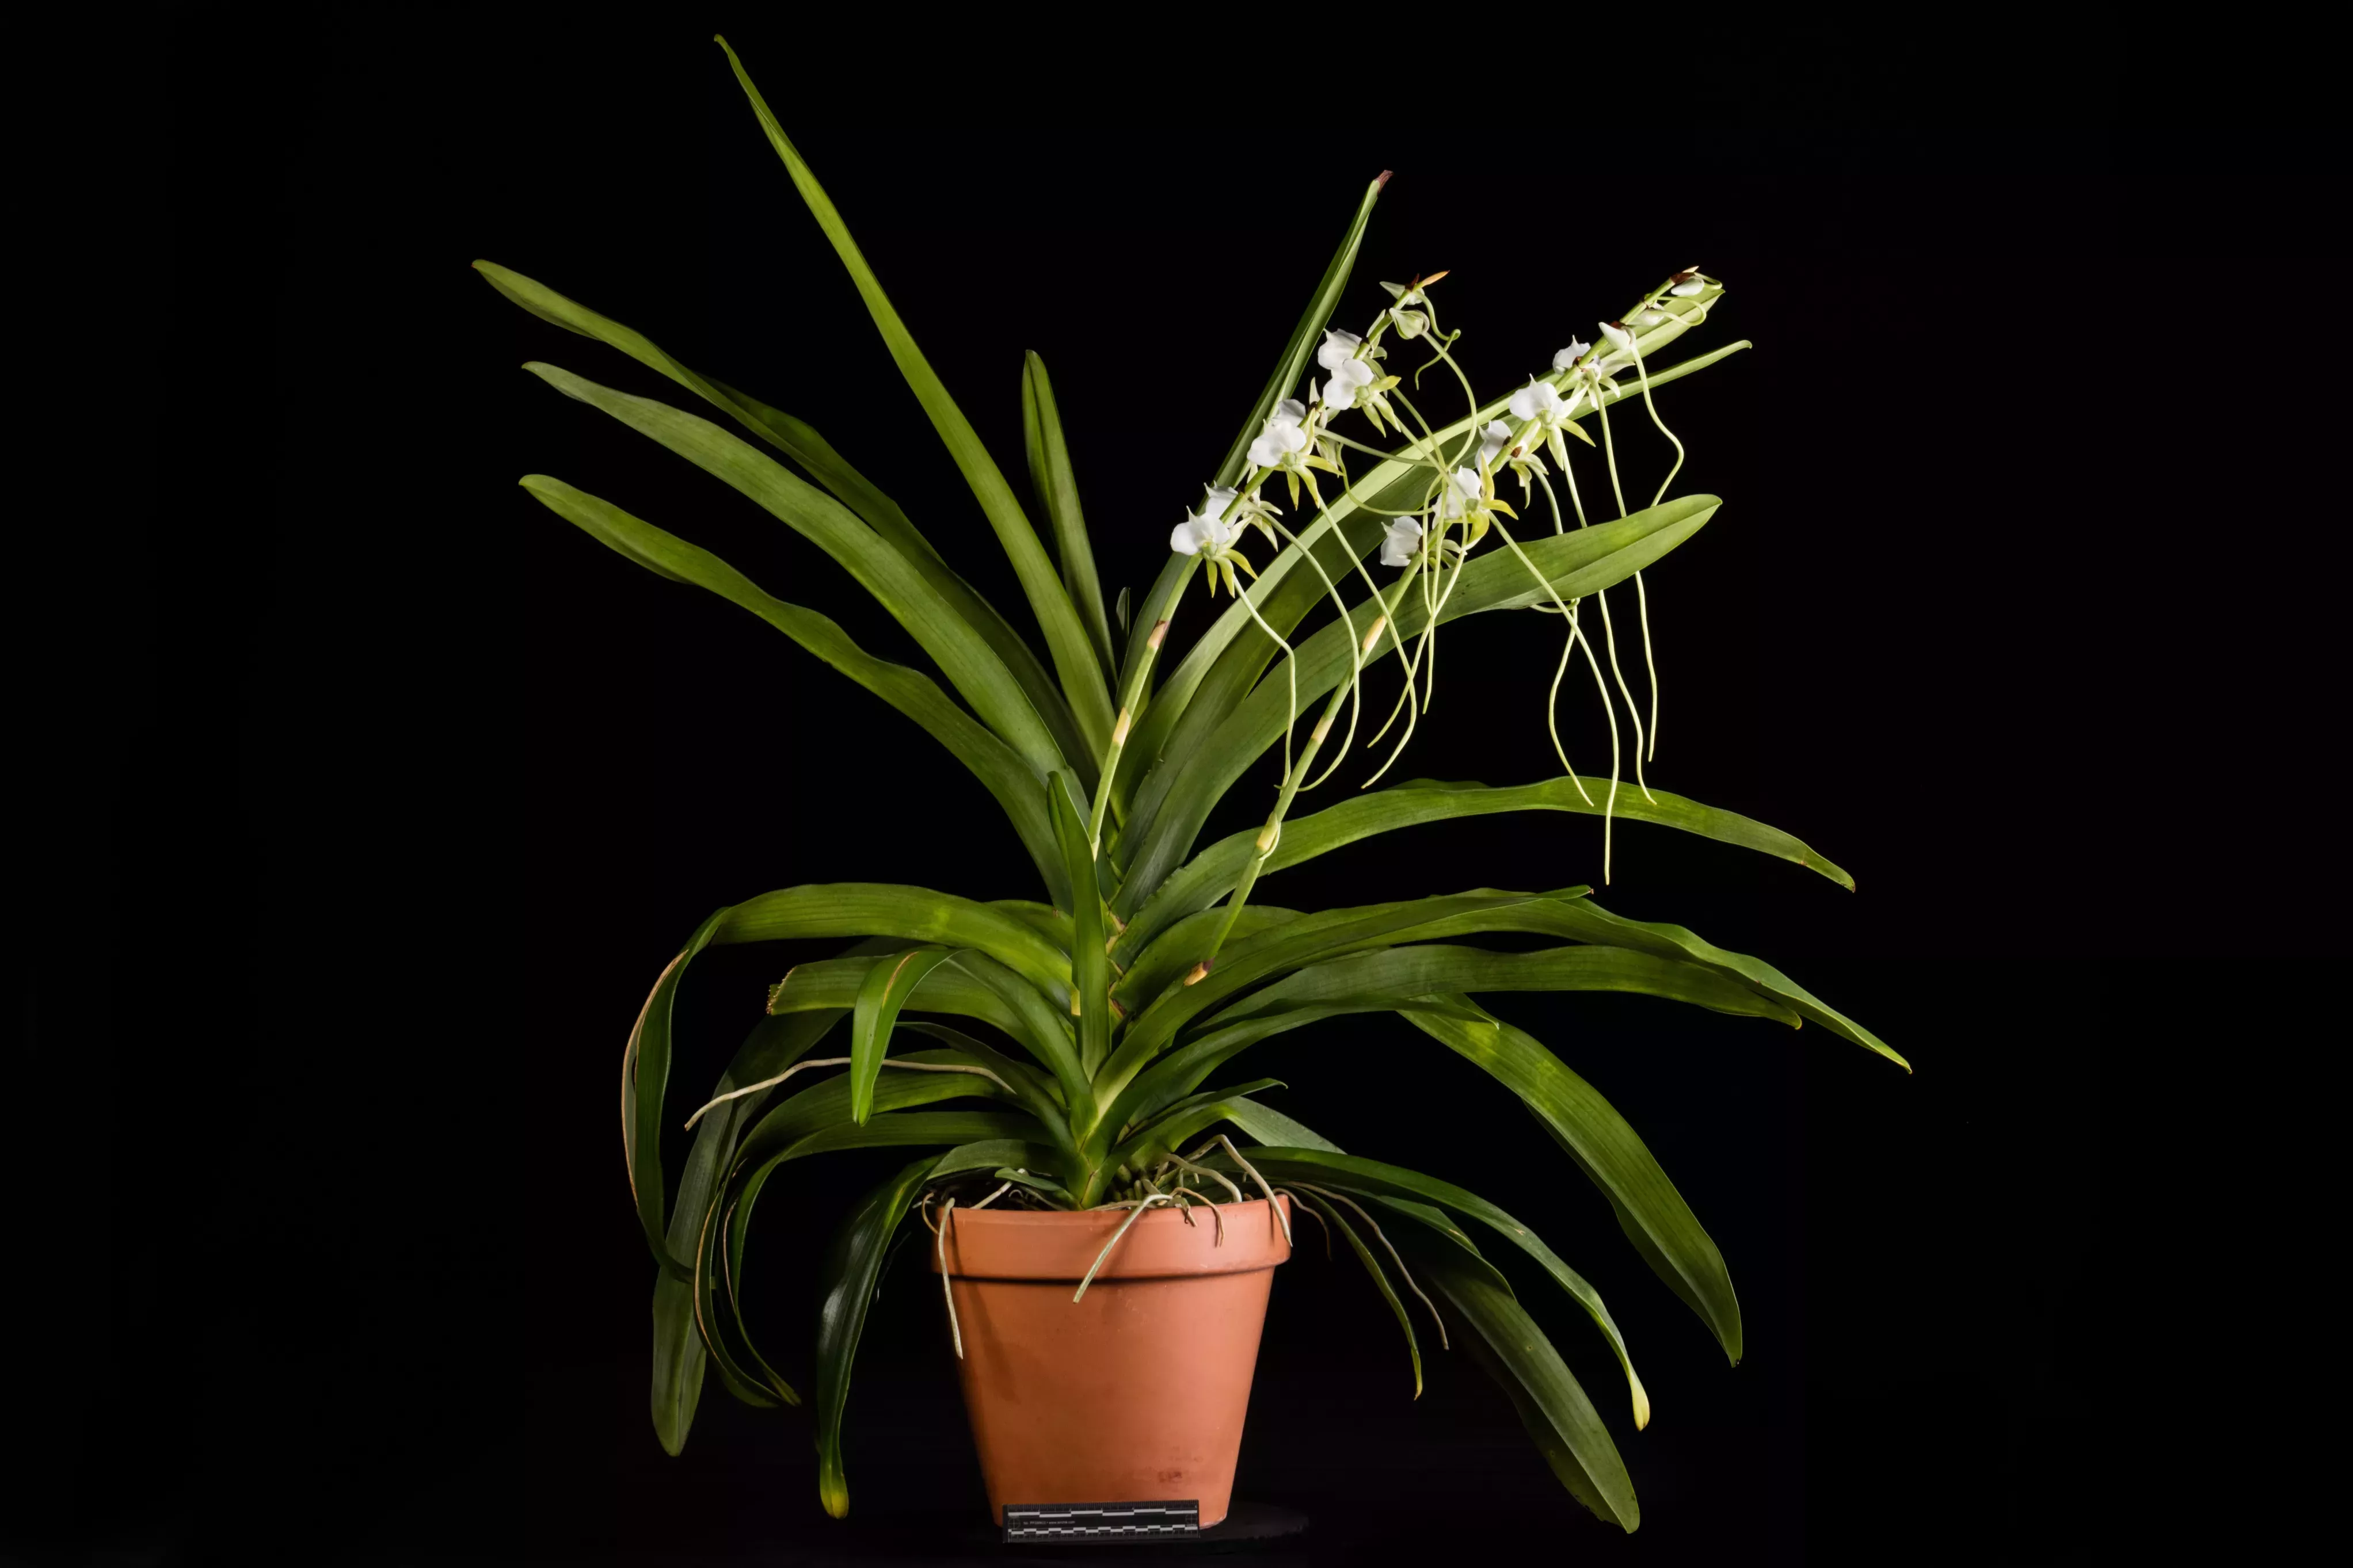 Potted orchid with long green leaves and white flowers against a black backdrop